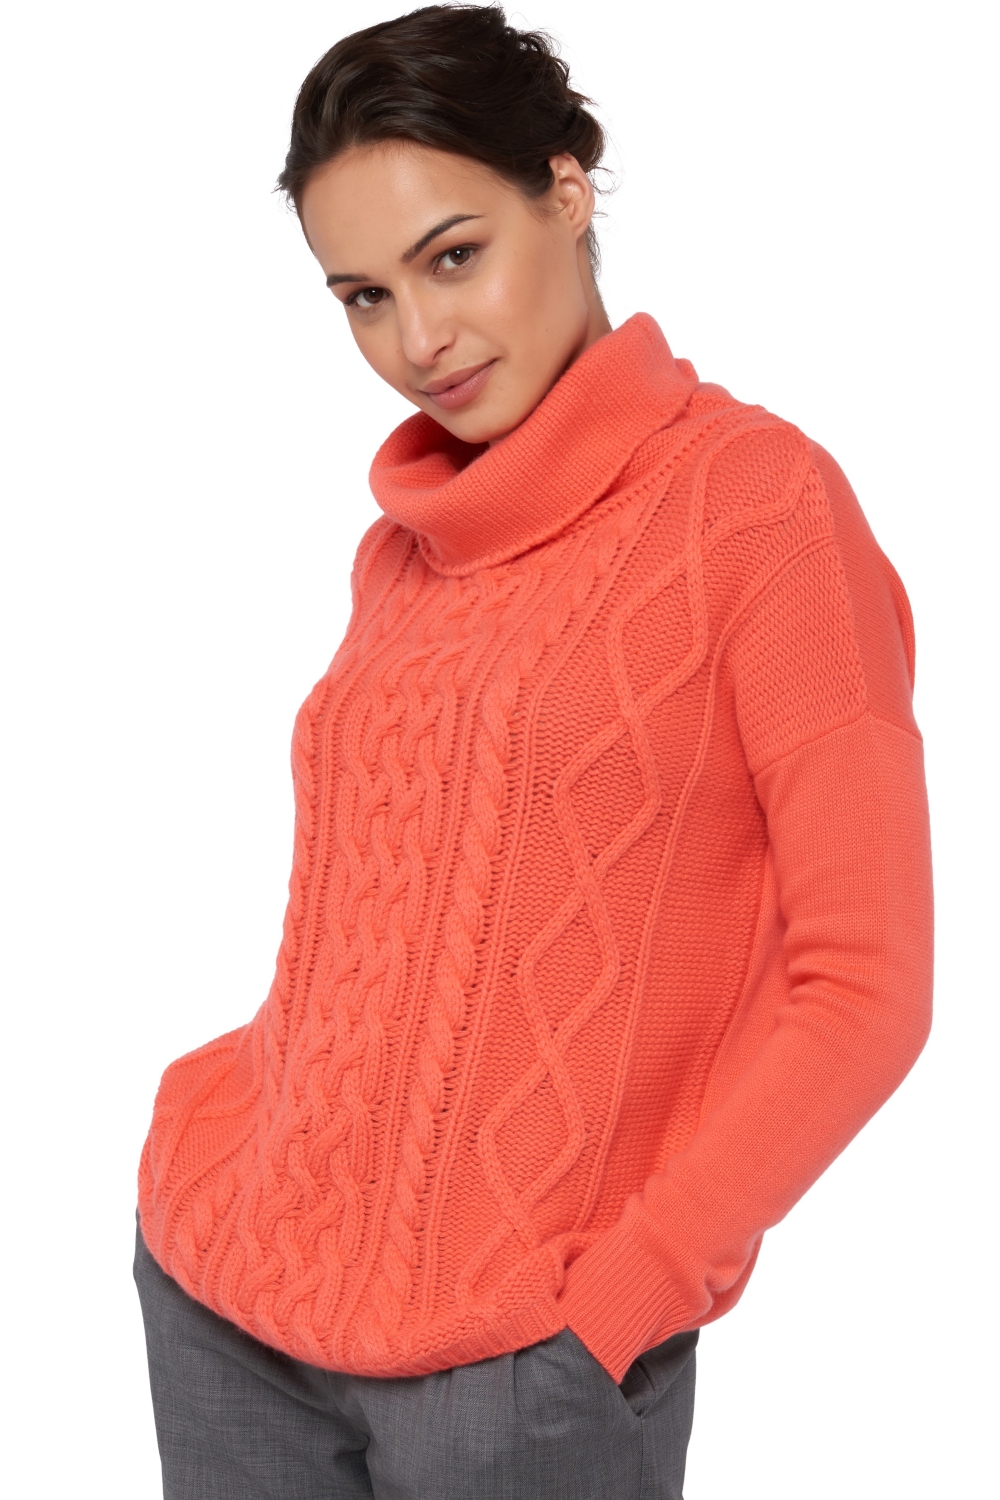 Cashmere ladies chunky sweater wonderful coral s